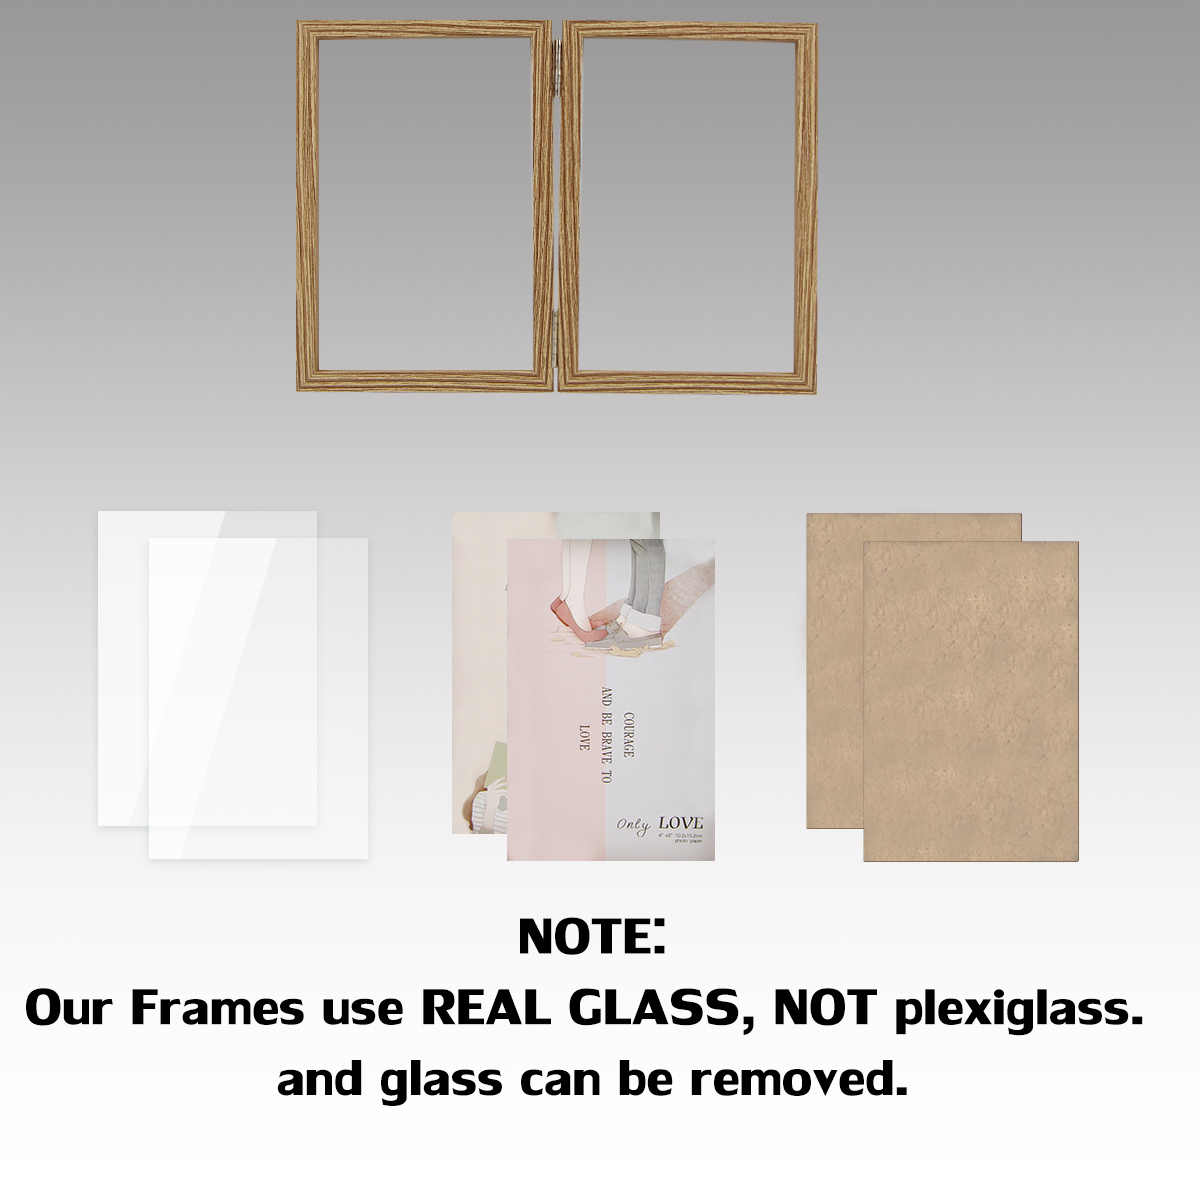 Forev 4x6 Double Picture Frame Wooden Hinged Photo Frame Definition Glass Stand Vertically on Desktop or Tabletop Black